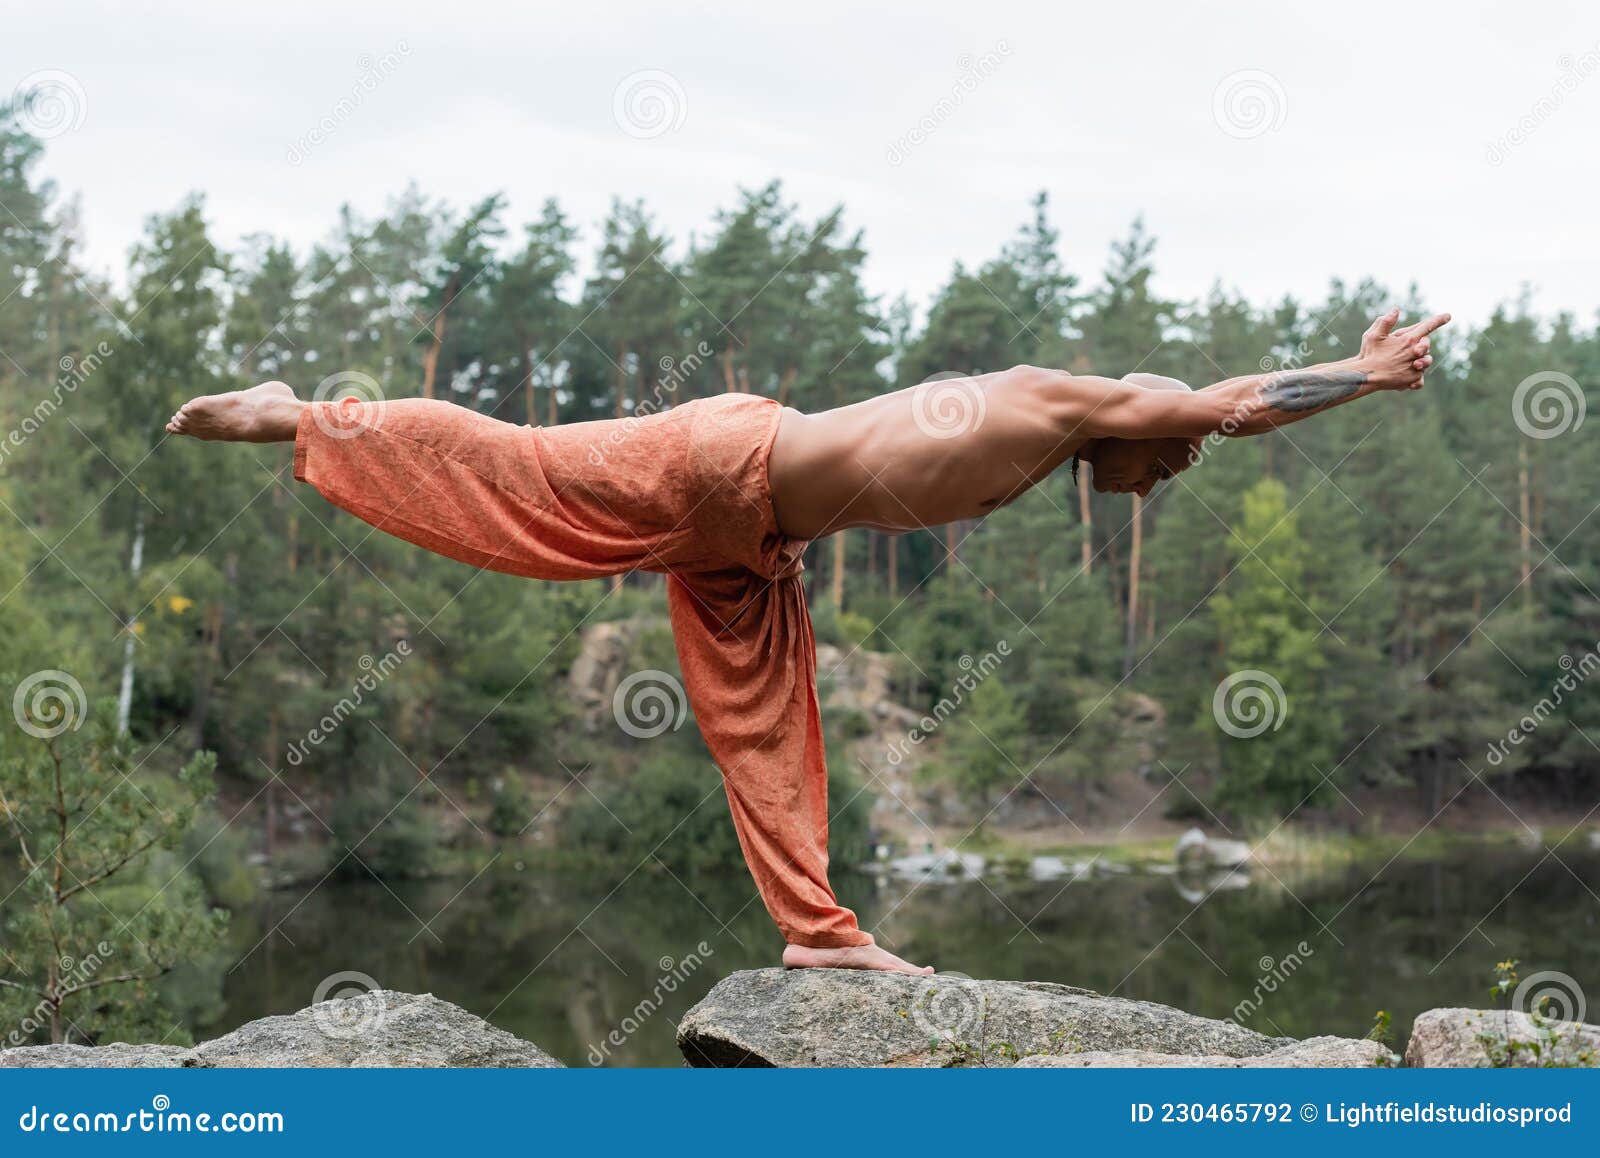 Side View of Shirtless Buddhist Meditating Stock Photo - Image of water ...